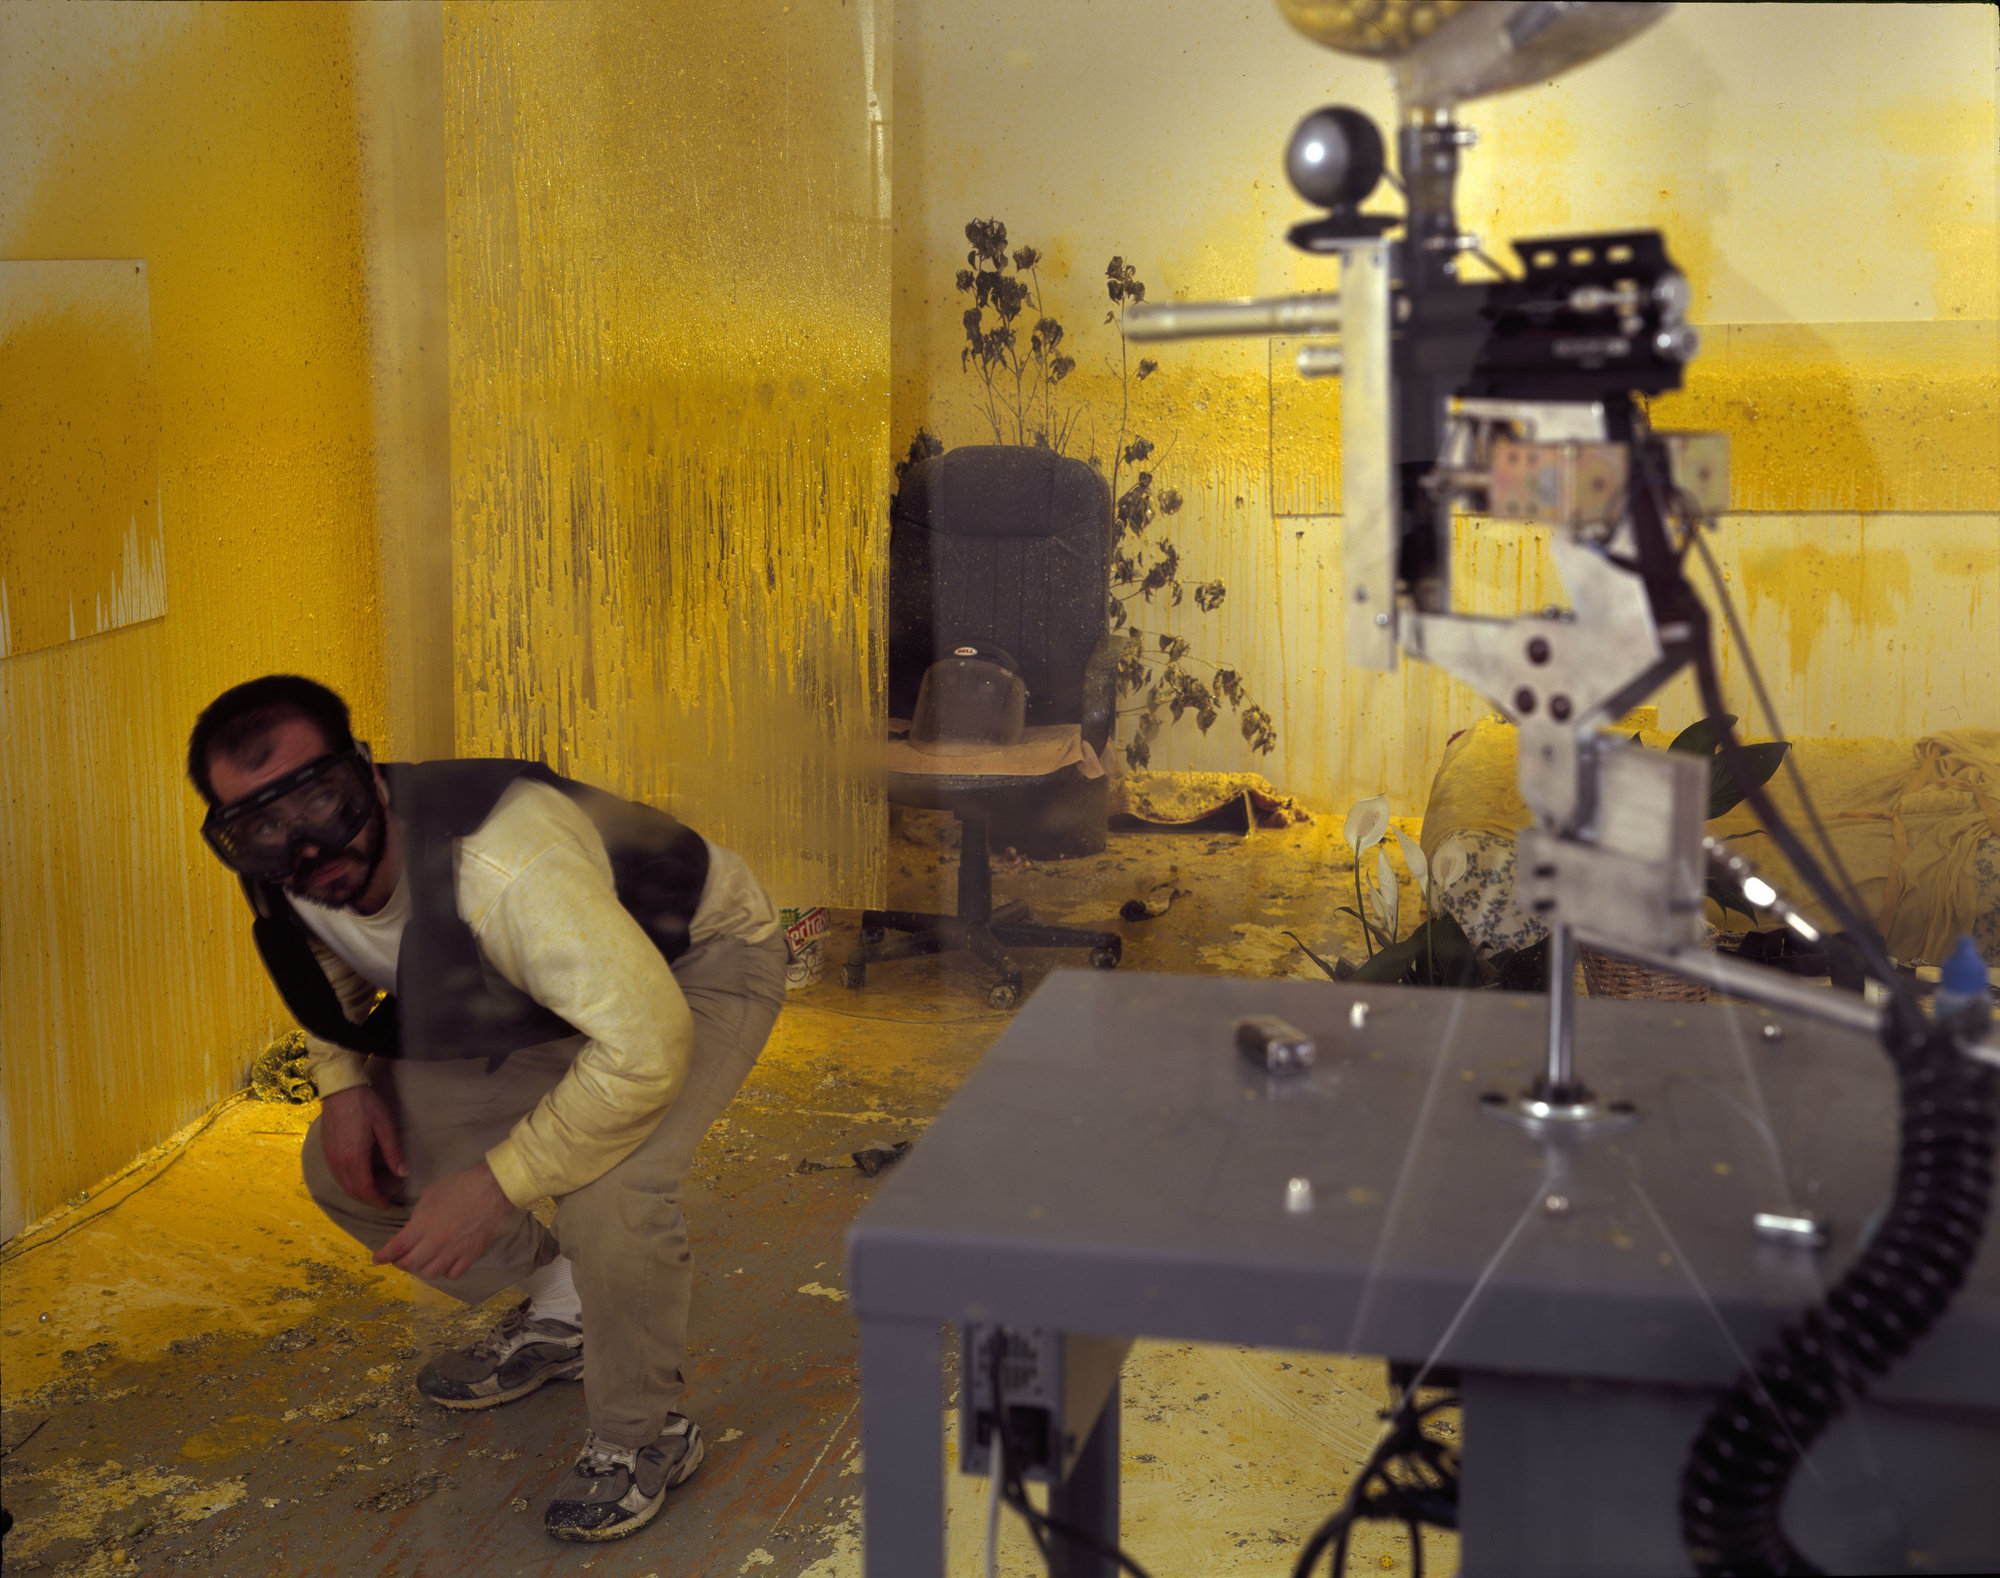 Performance artist Wafaa Bilal gets shot with paintballs in his interactive installation "Shoot An Iraqi"